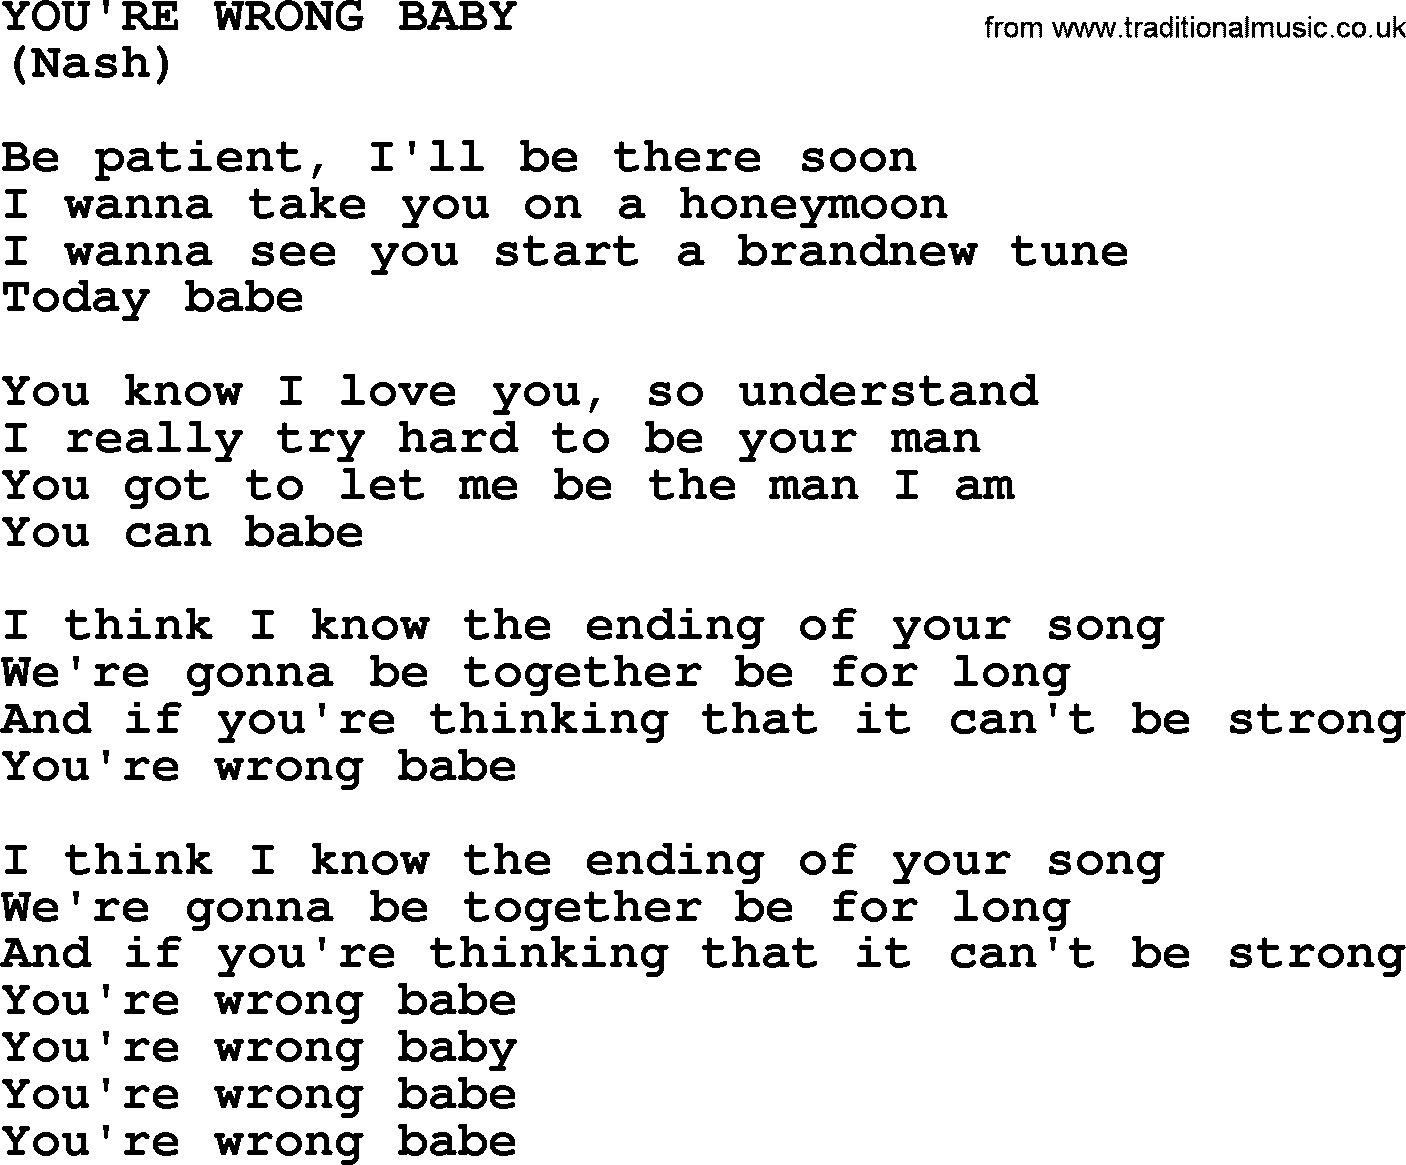 The Byrds song You're Wrong Baby, lyrics